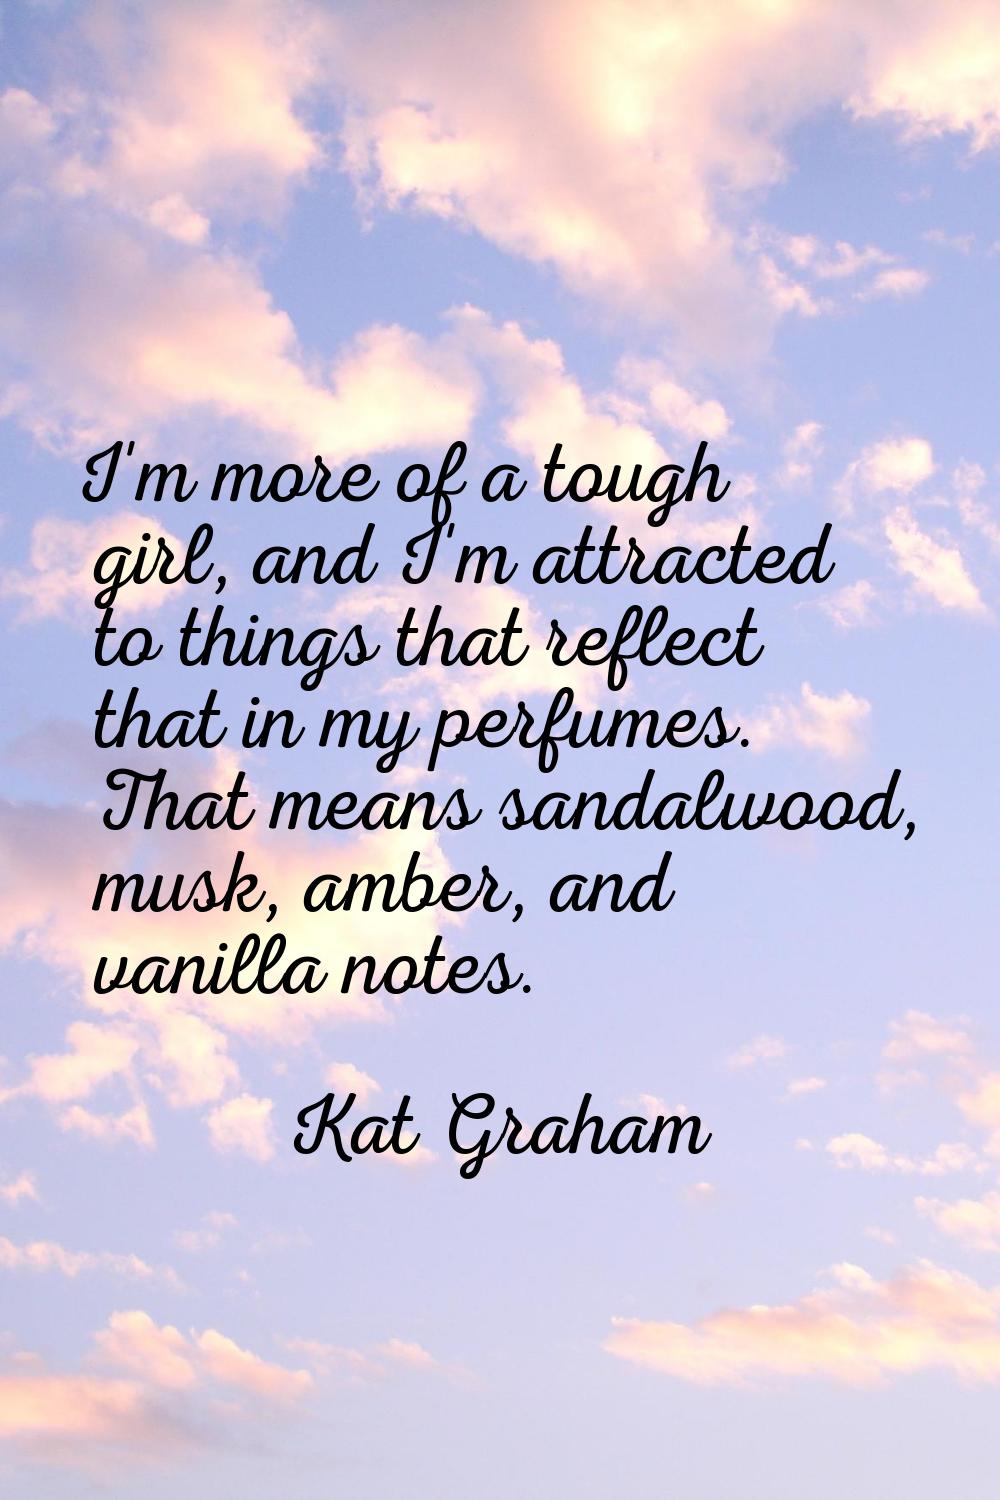 I'm more of a tough girl, and I'm attracted to things that reflect that in my perfumes. That means 